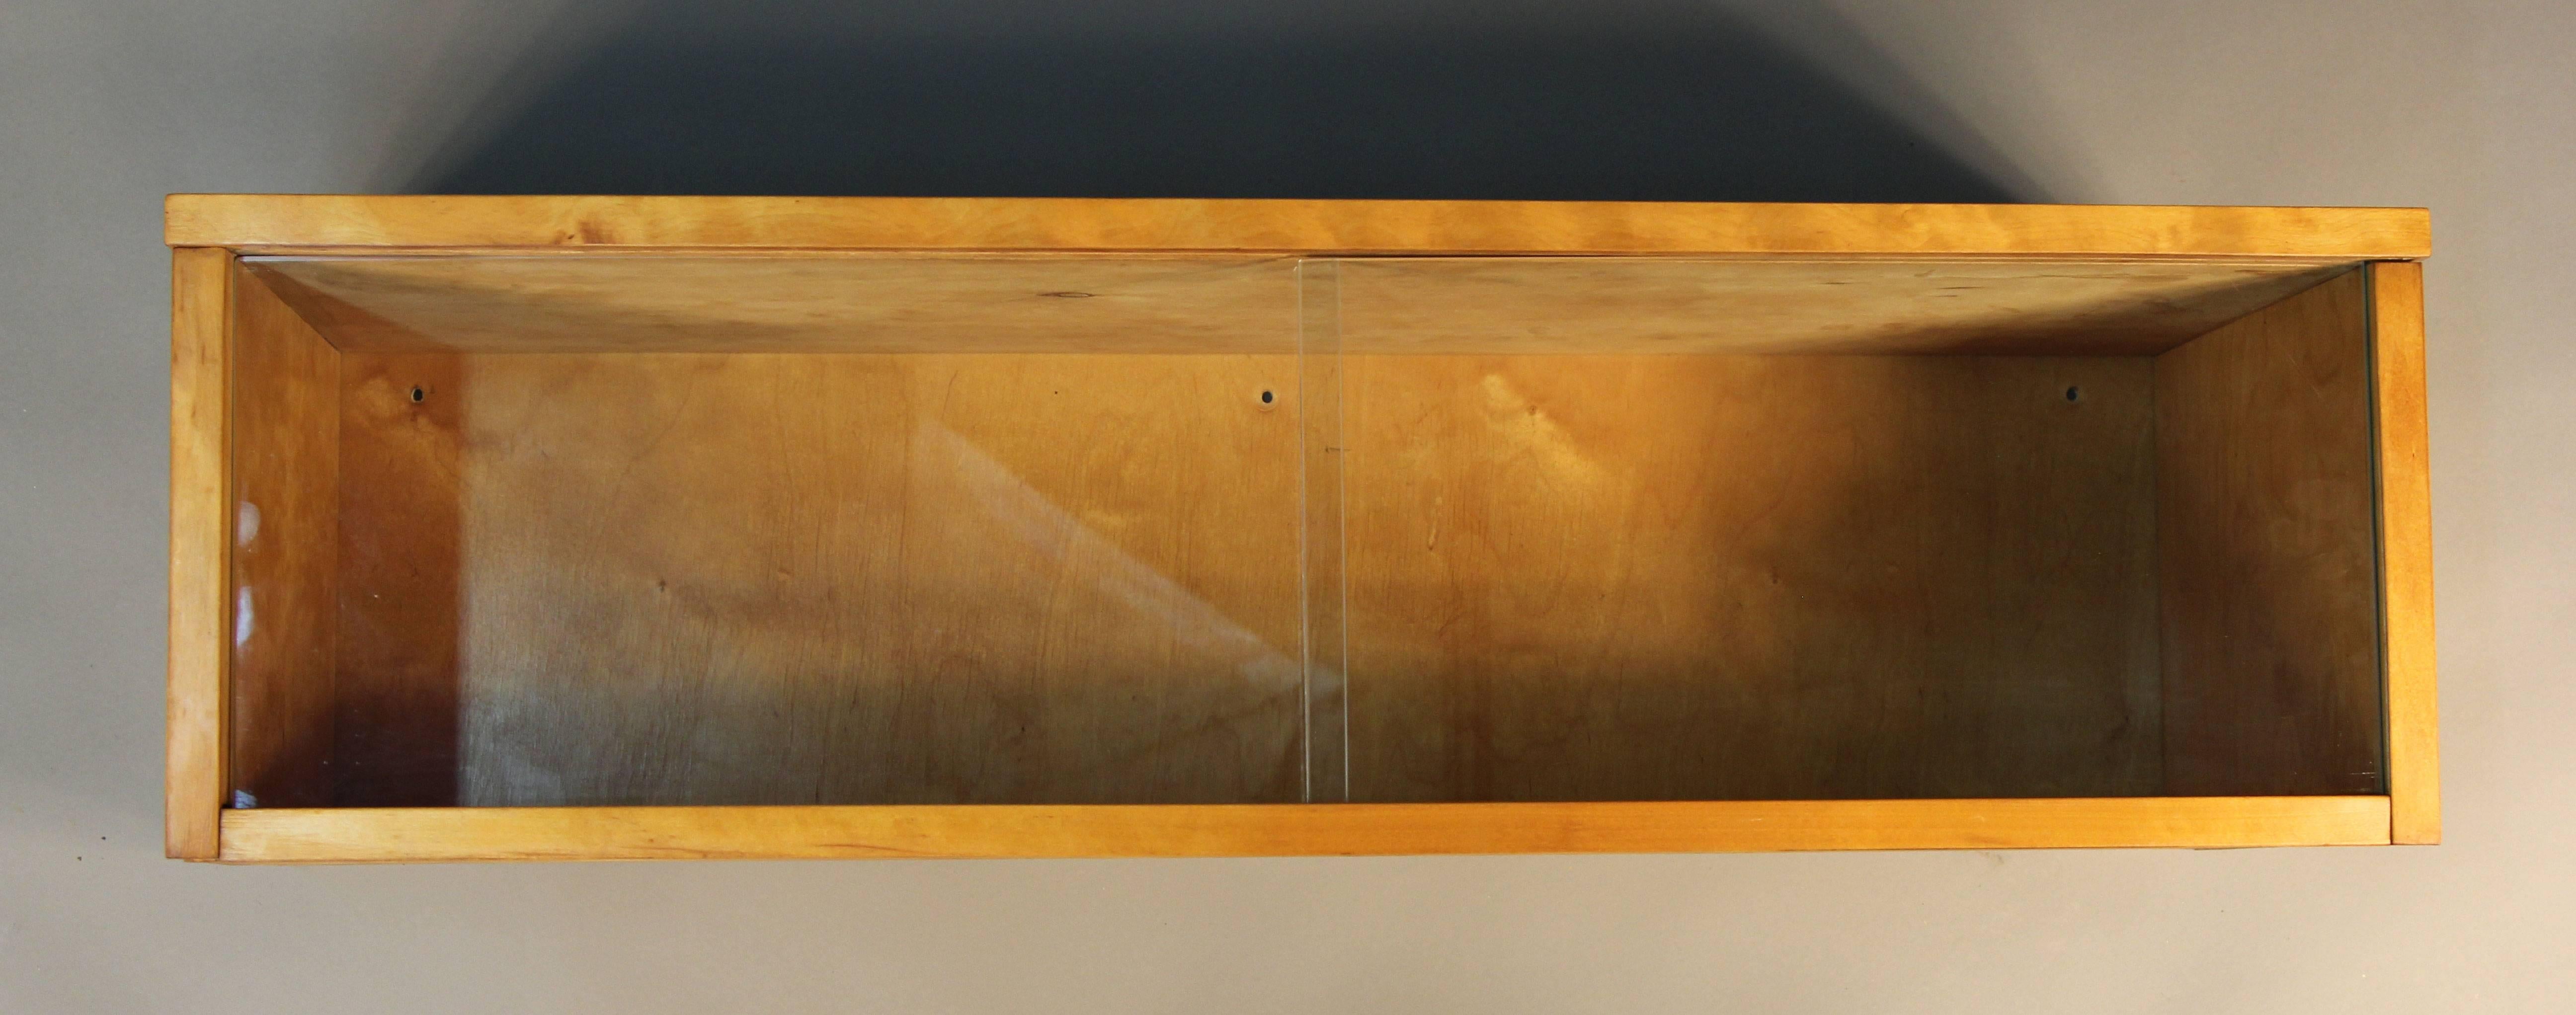 Rare display case designed by Alvar Aalto for Artek Finland.  Pruchased at Chicaogo's Baldwin Kingrey in 1955.  During the 1950s, while Aalto was teaching at MIT, the Midwest franchise obtained the regional exclusive for Aalto's Artek furniture